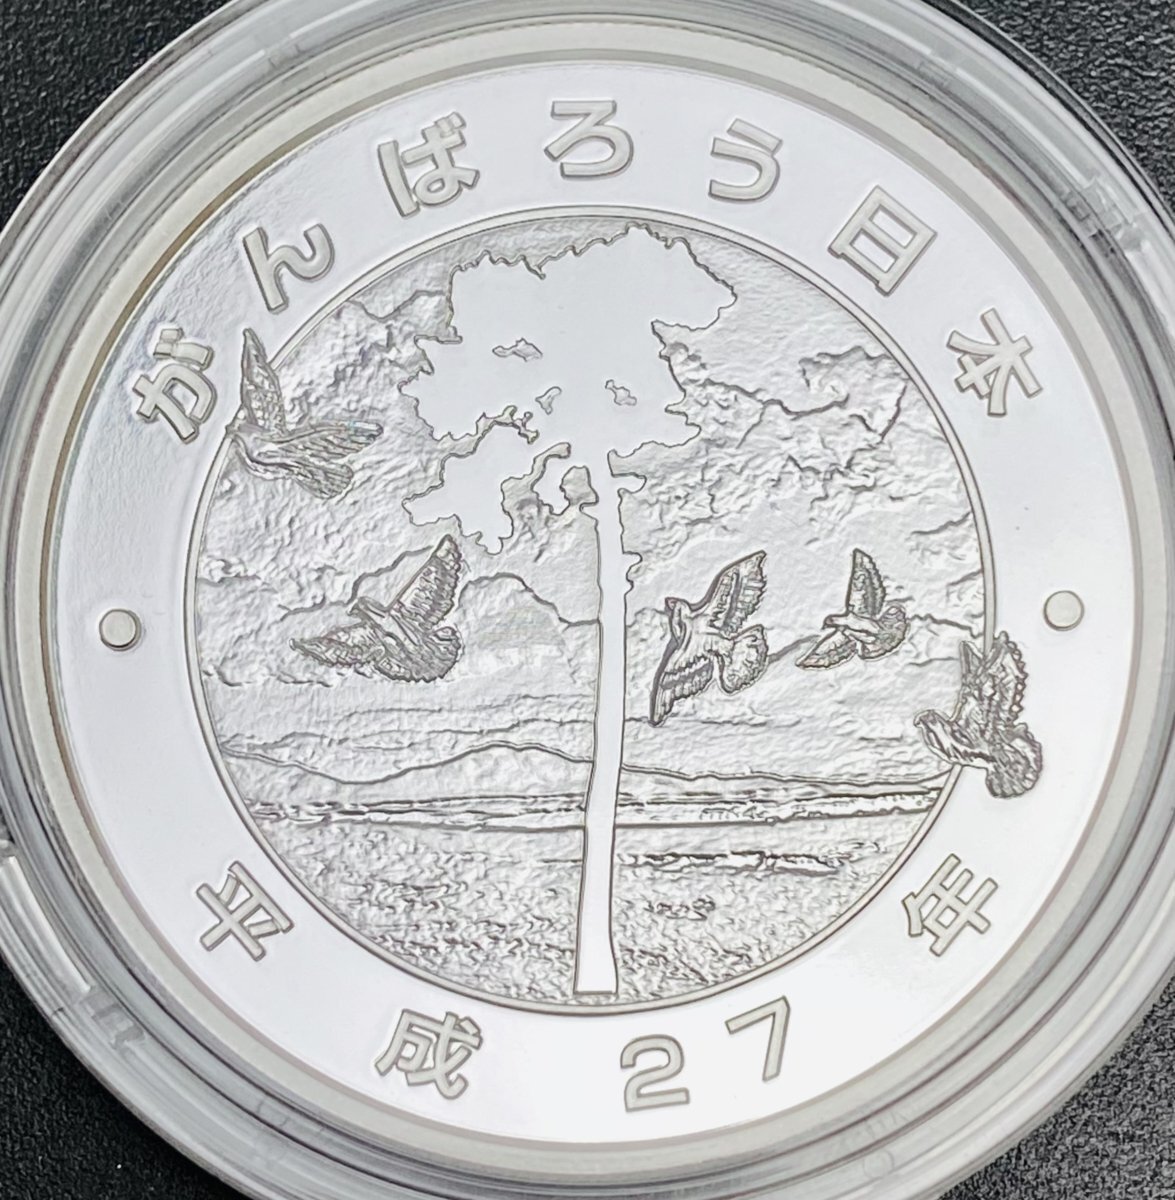 1 jpy ~ East Japan large earthquake .. project memory thousand jpy silver coin . proof money set no. 2 next 31.1g 2015 year Heisei era 27 year 1000 jpy silver coin memory money original silver coin G2015h2